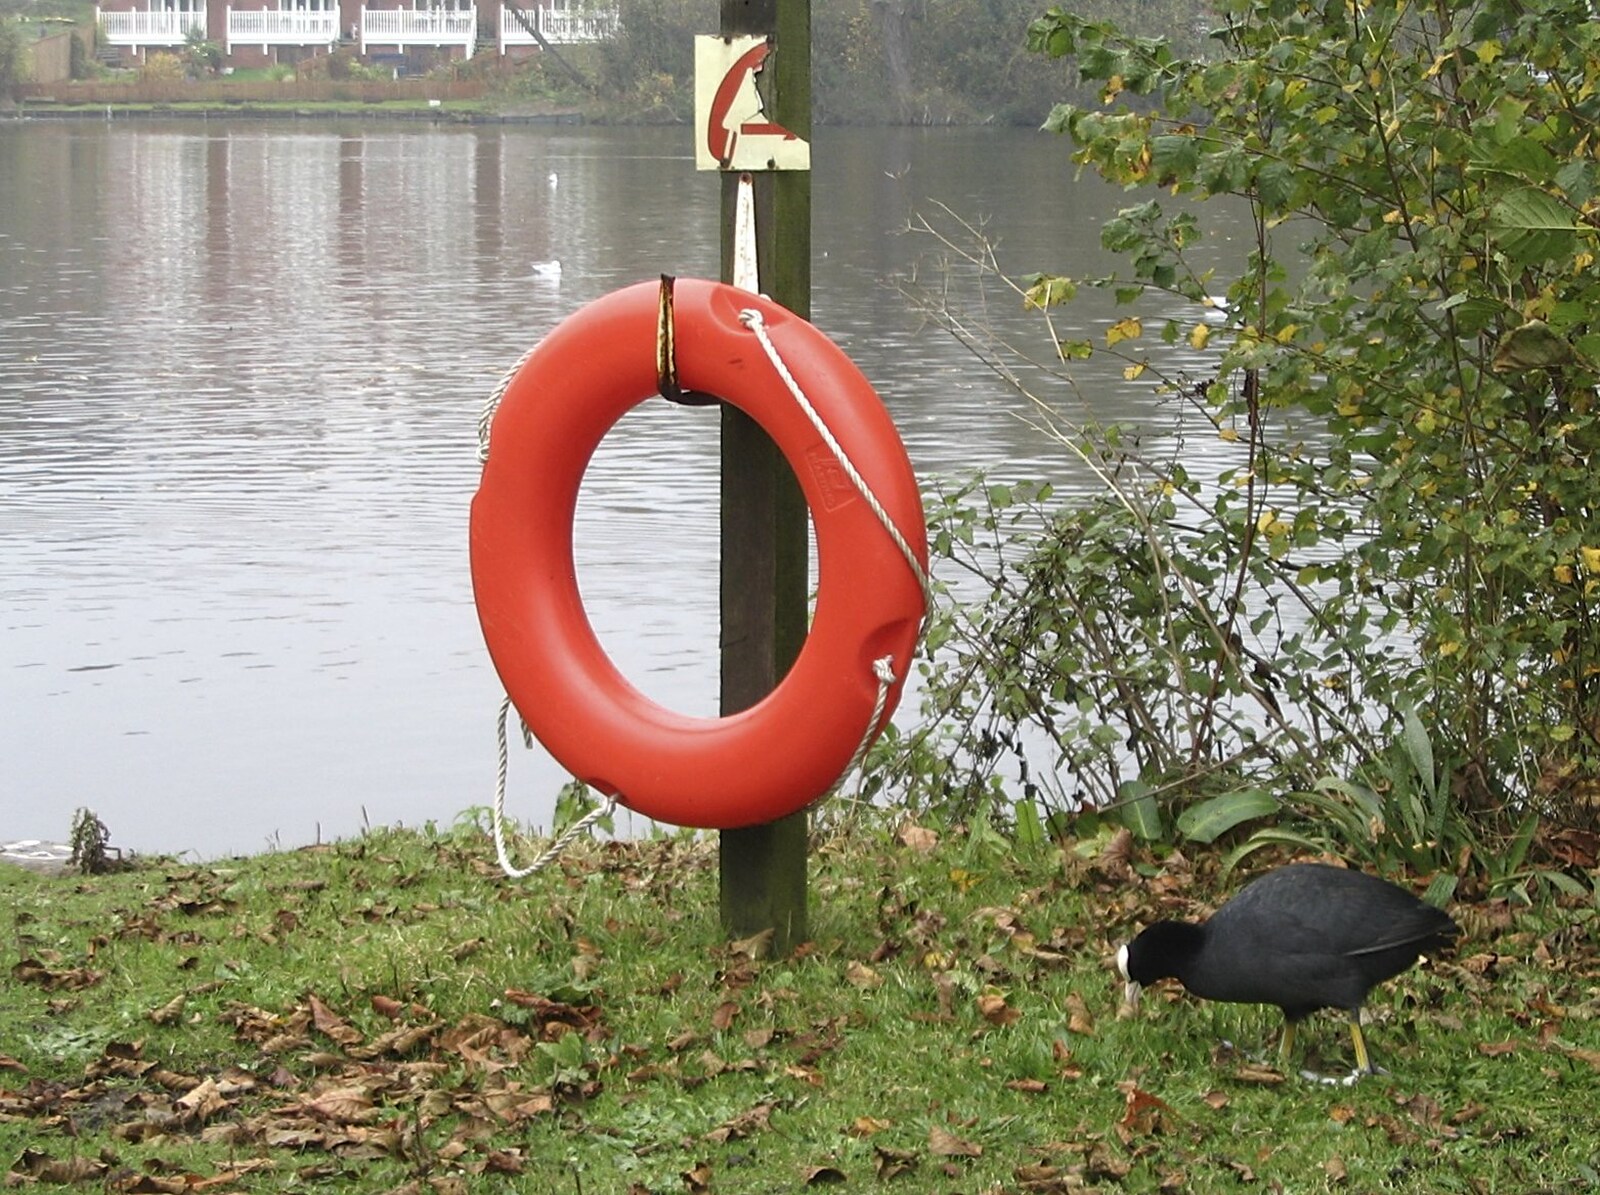 A Moorhen scoots past a life belt from Feeding the Ducks: a Diss and Norwich Miscellany - 7th November 2004